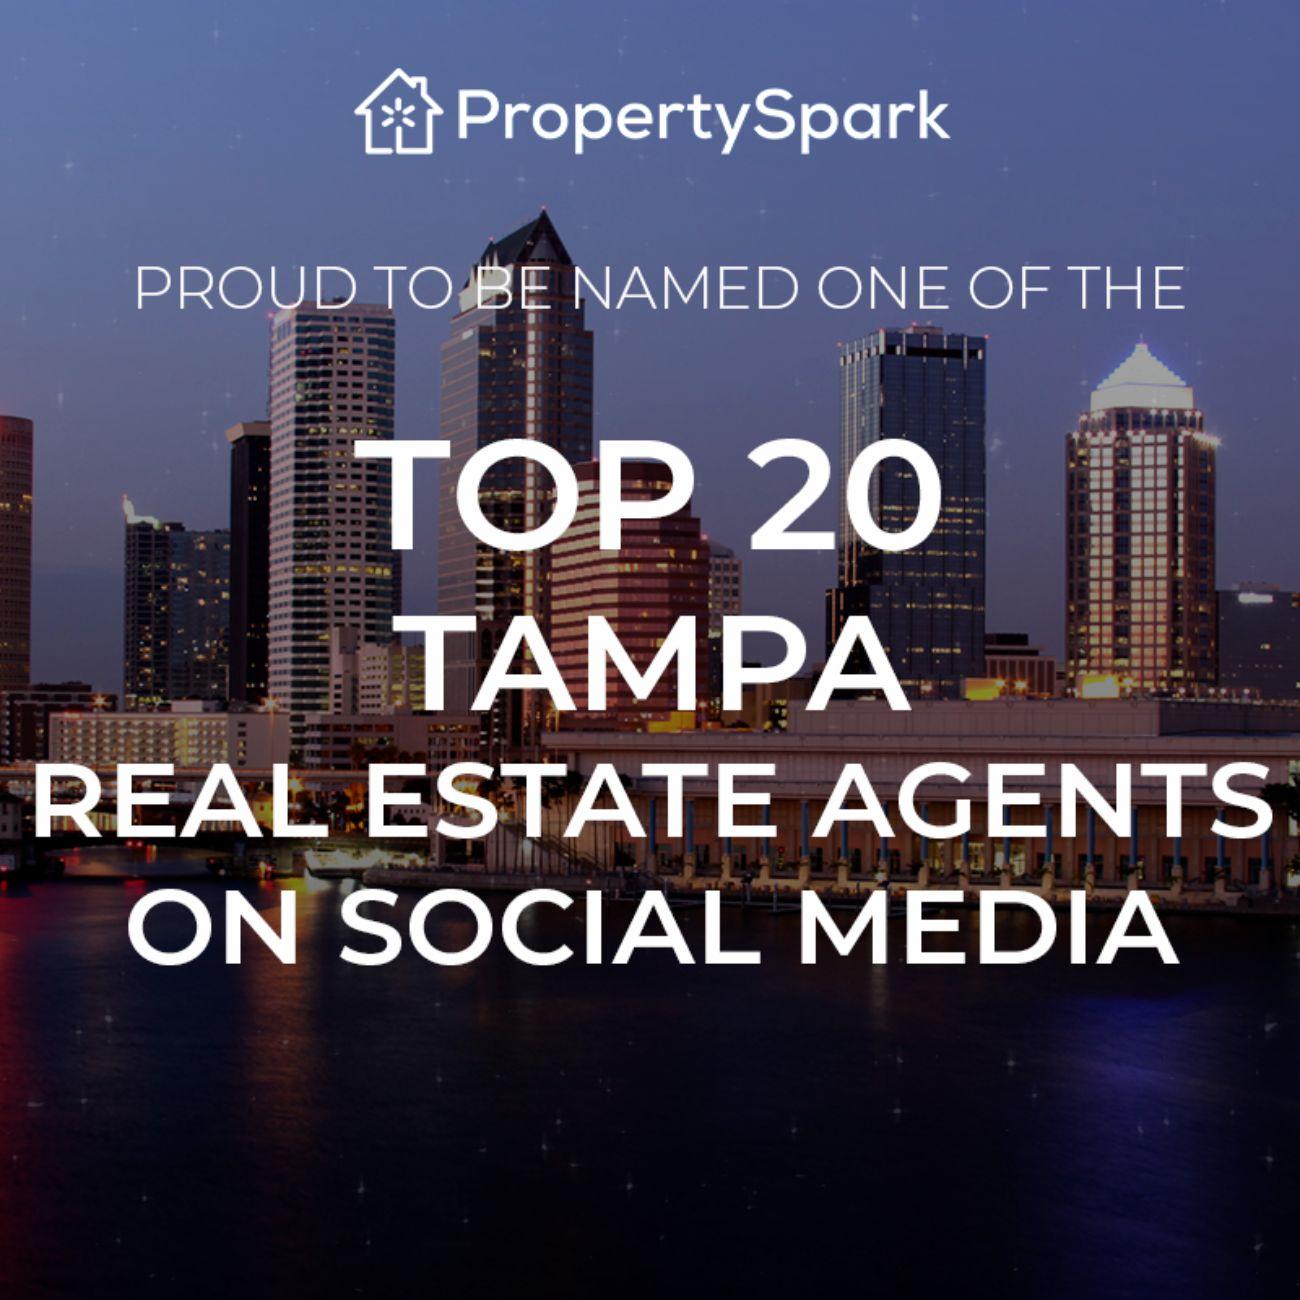 How many real estate agents in tampa